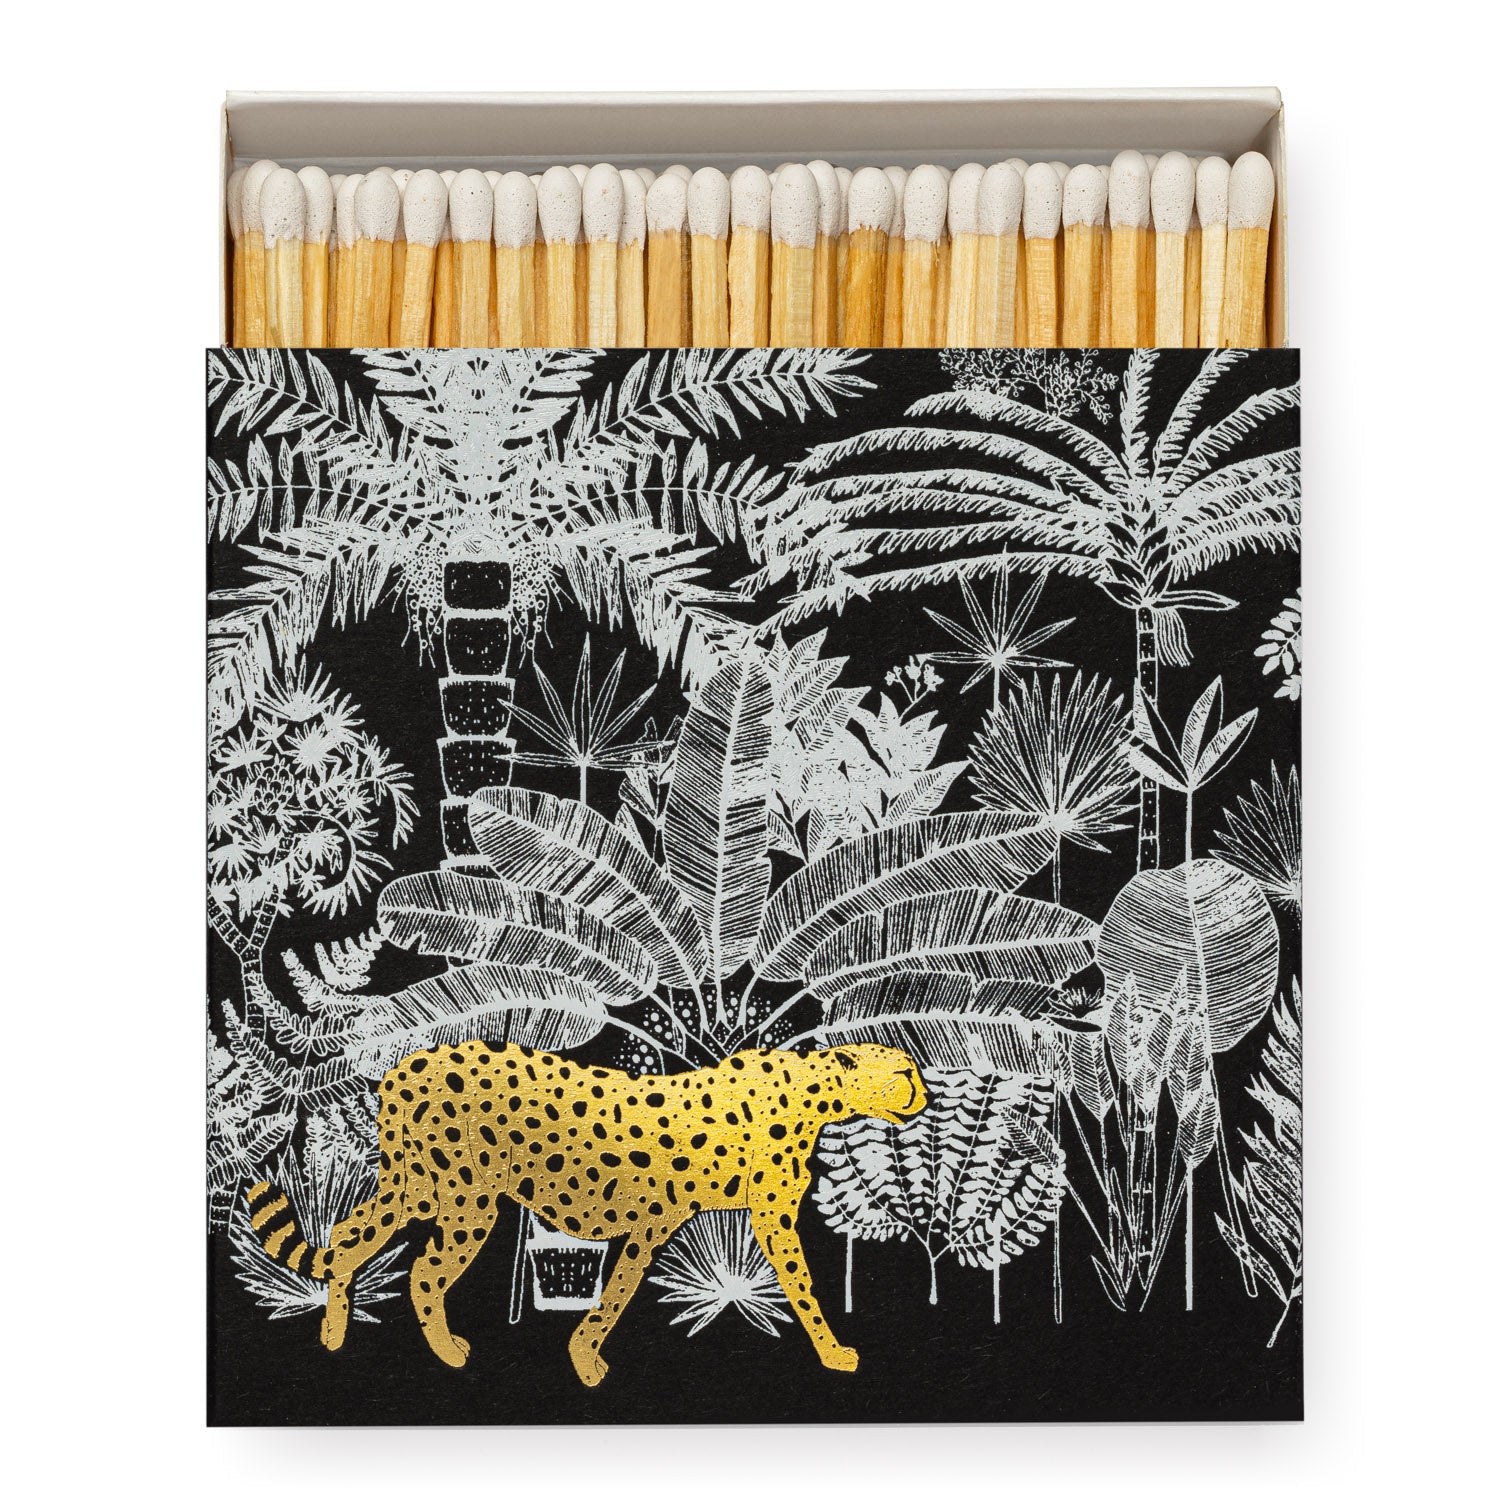 Cheetah in Jungle Luxury Matches – 100 Stick Matches